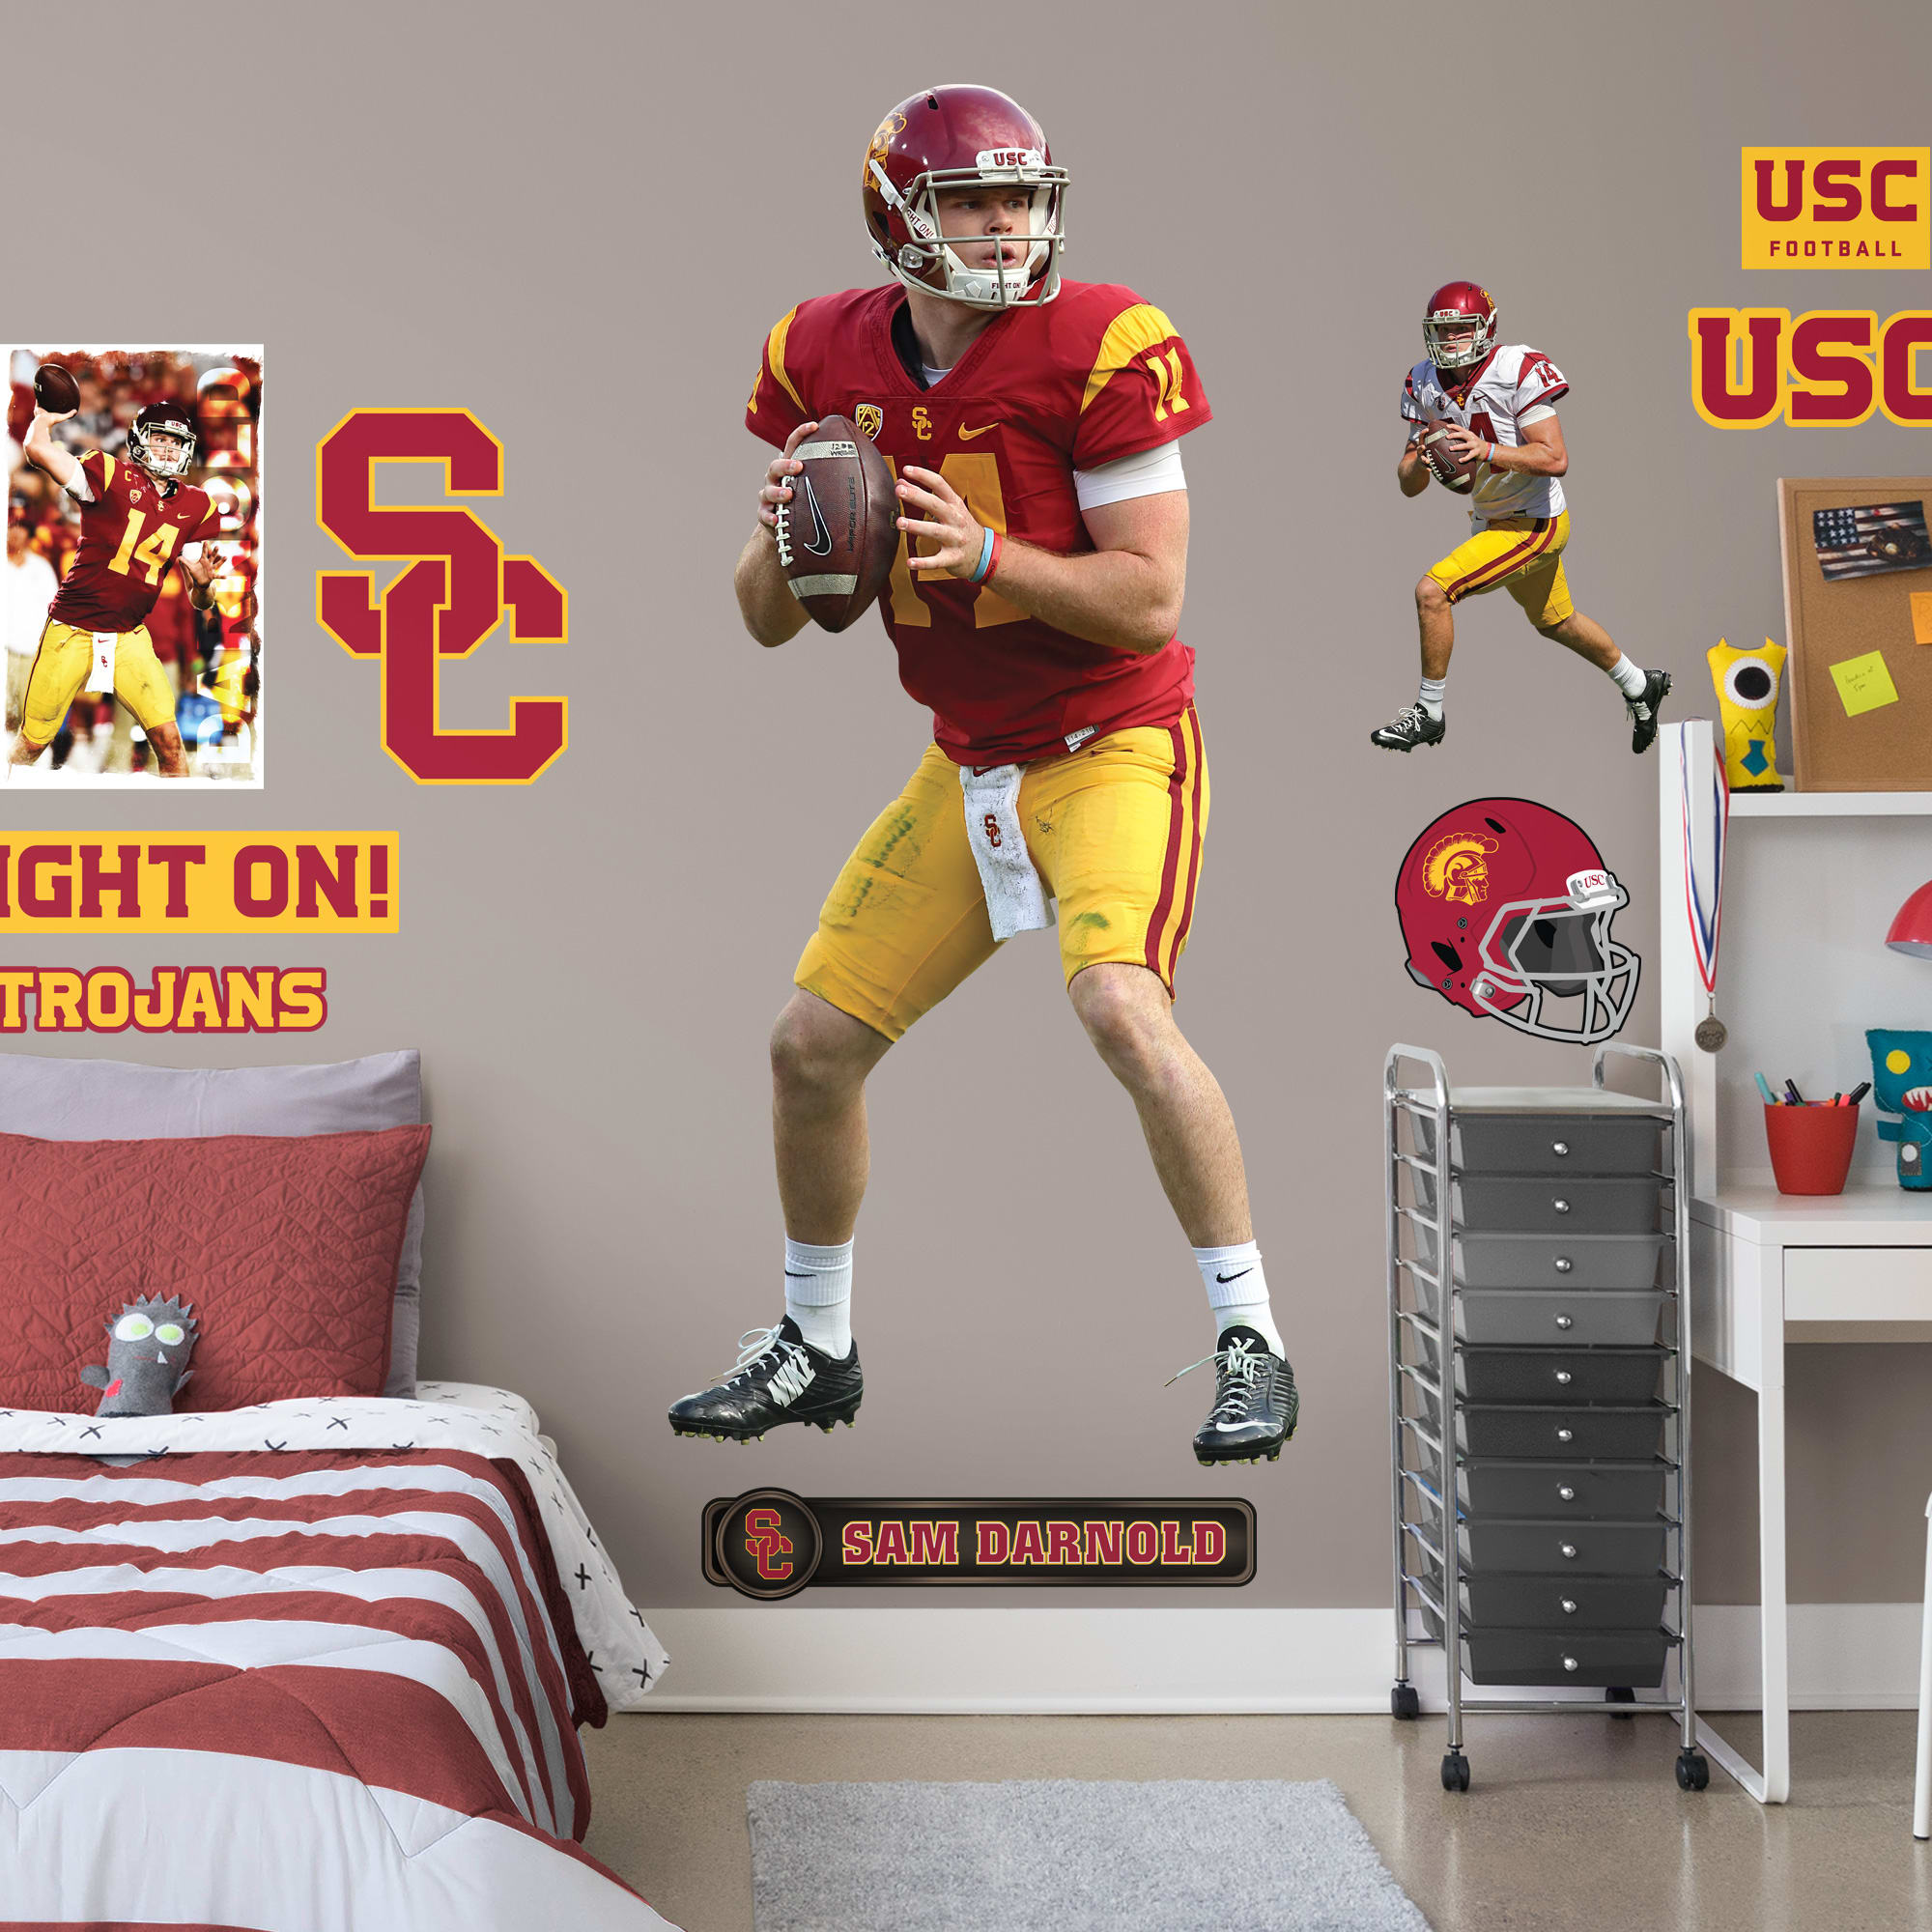 Sam Darnold for USC Trojans: USC - Officially Licensed Removable Wall Decal Life-Size Athlete + 9 Decals (35"W x 77"H) by Fathea